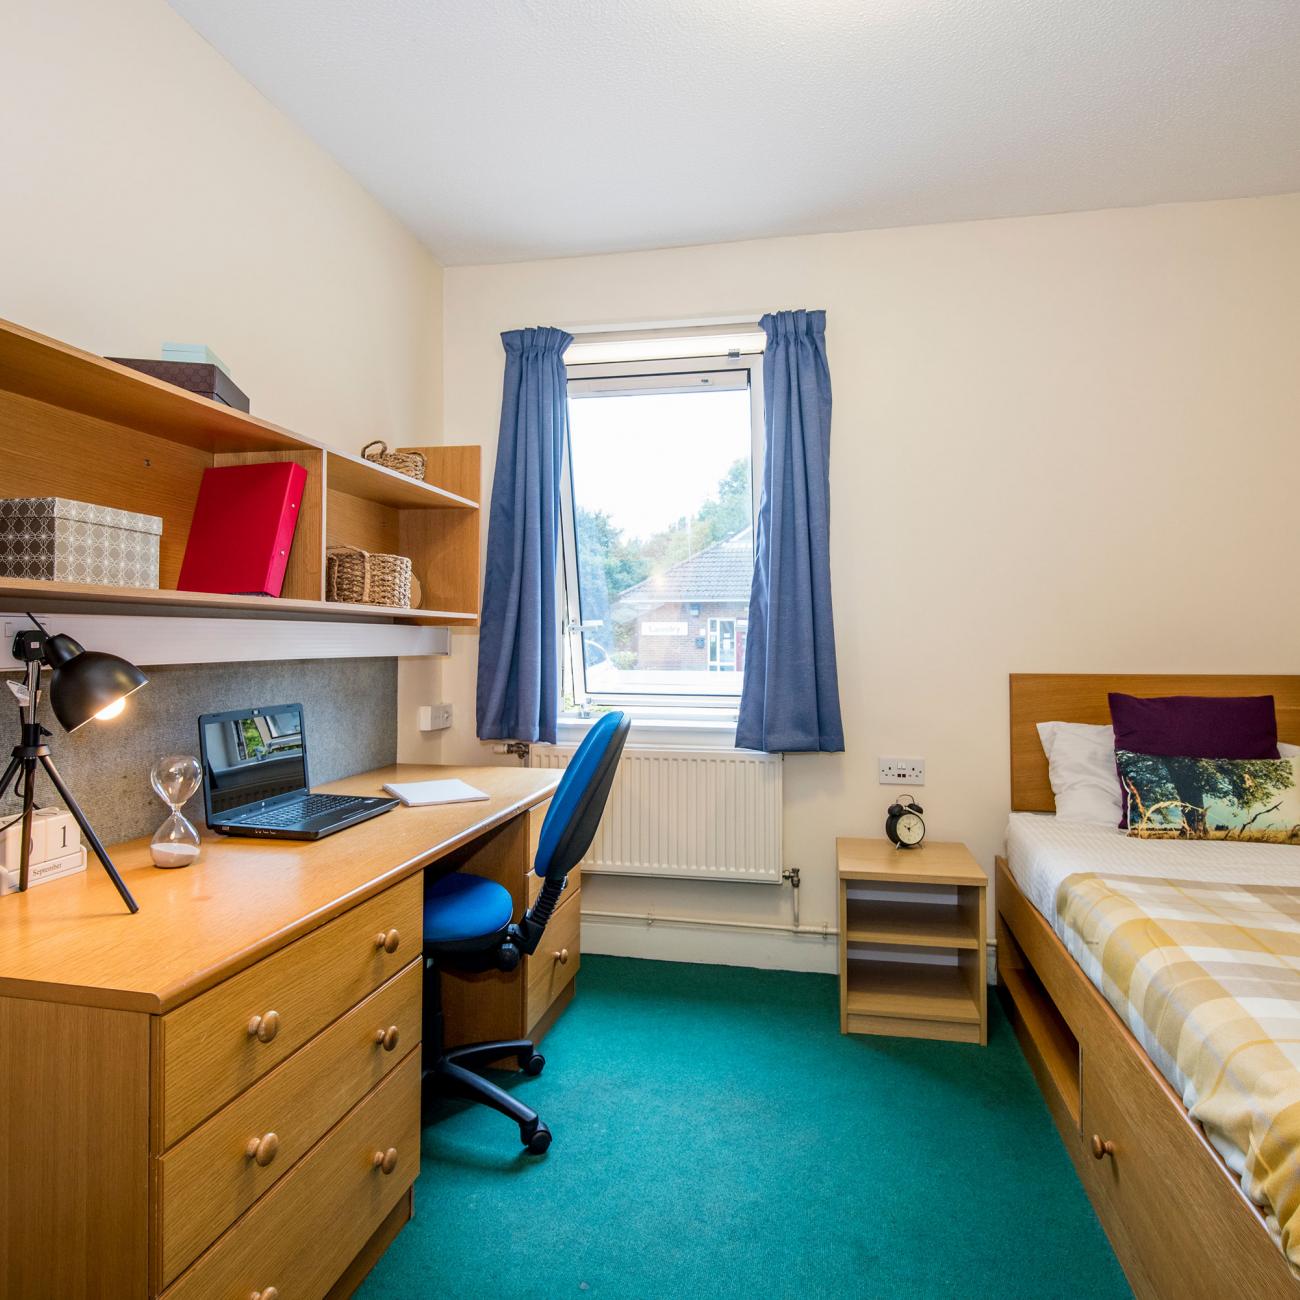 A student bedroom. A section of green carpet separates a single bed with patterned sheets and a large wooden desk. A window on the rear wall lets light in.